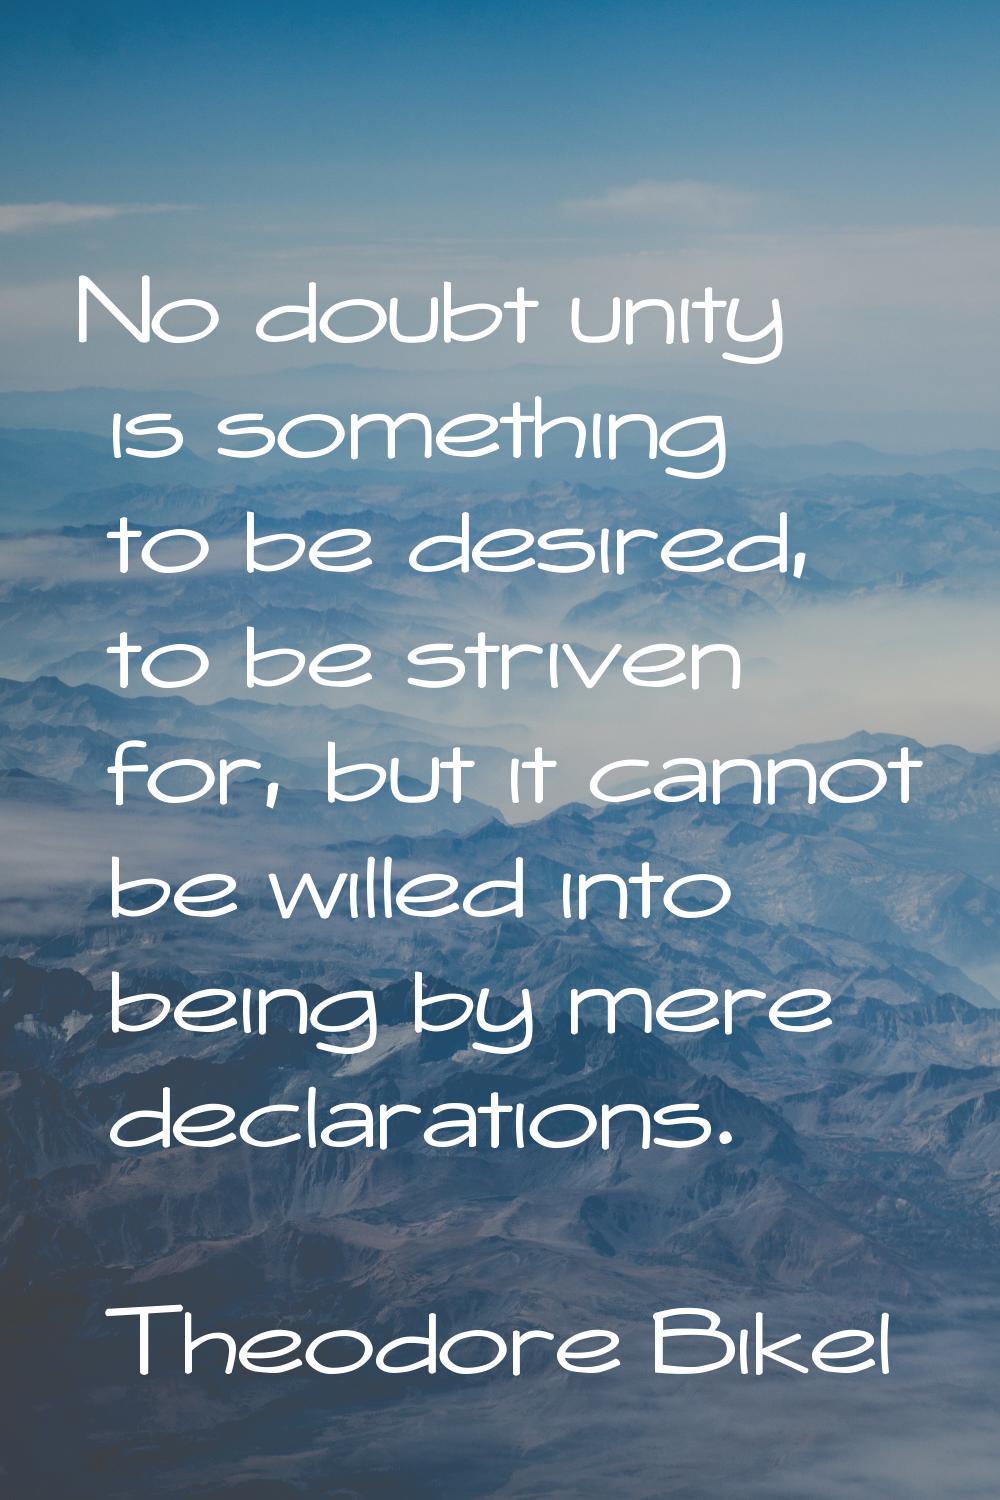 No doubt unity is something to be desired, to be striven for, but it cannot be willed into being by